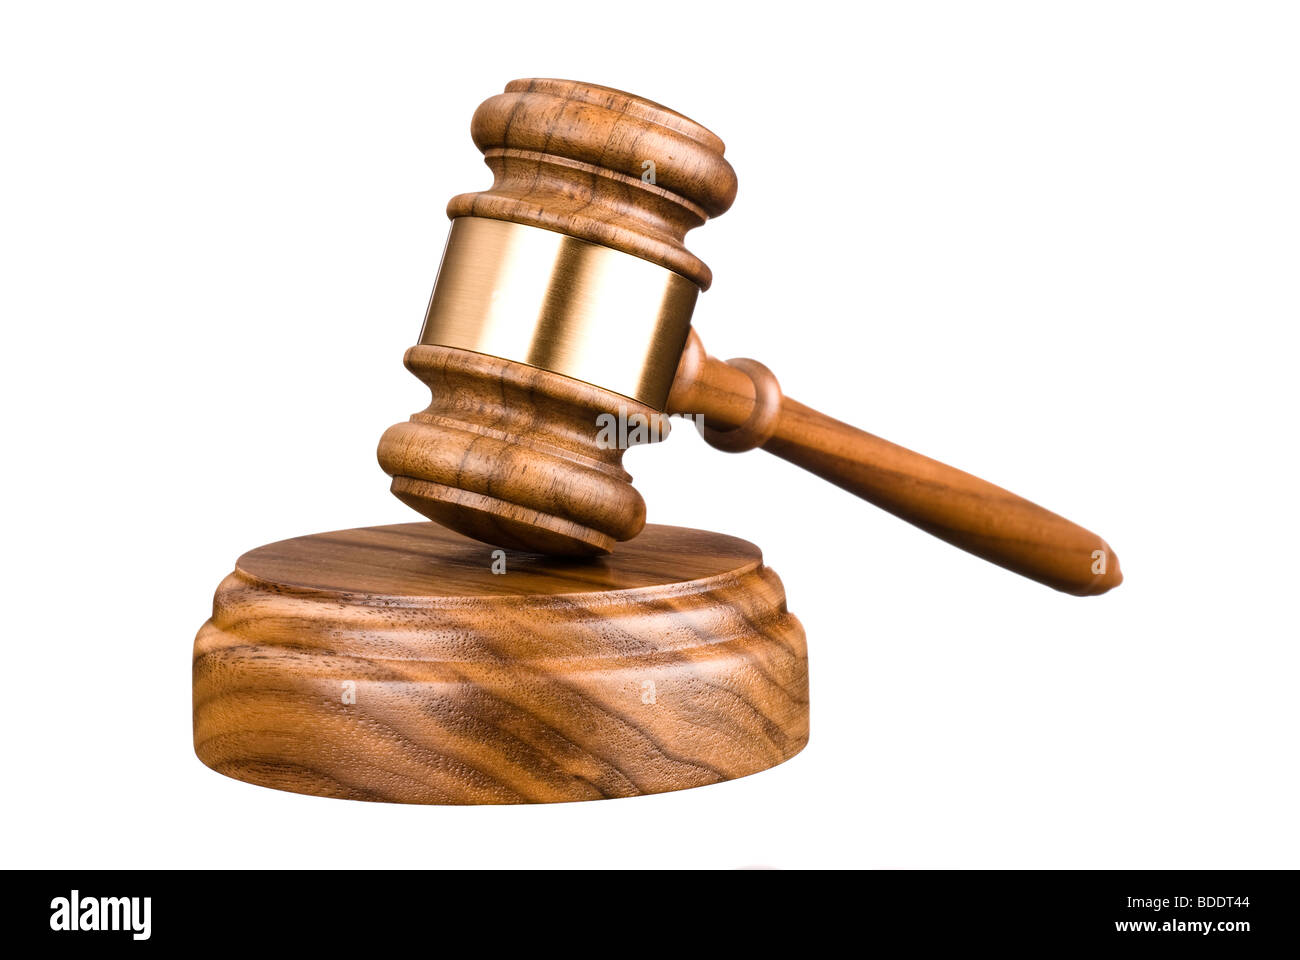 A gavel and wooden block isolated on white for use with any legal or auctioneer inferences. Stock Photo